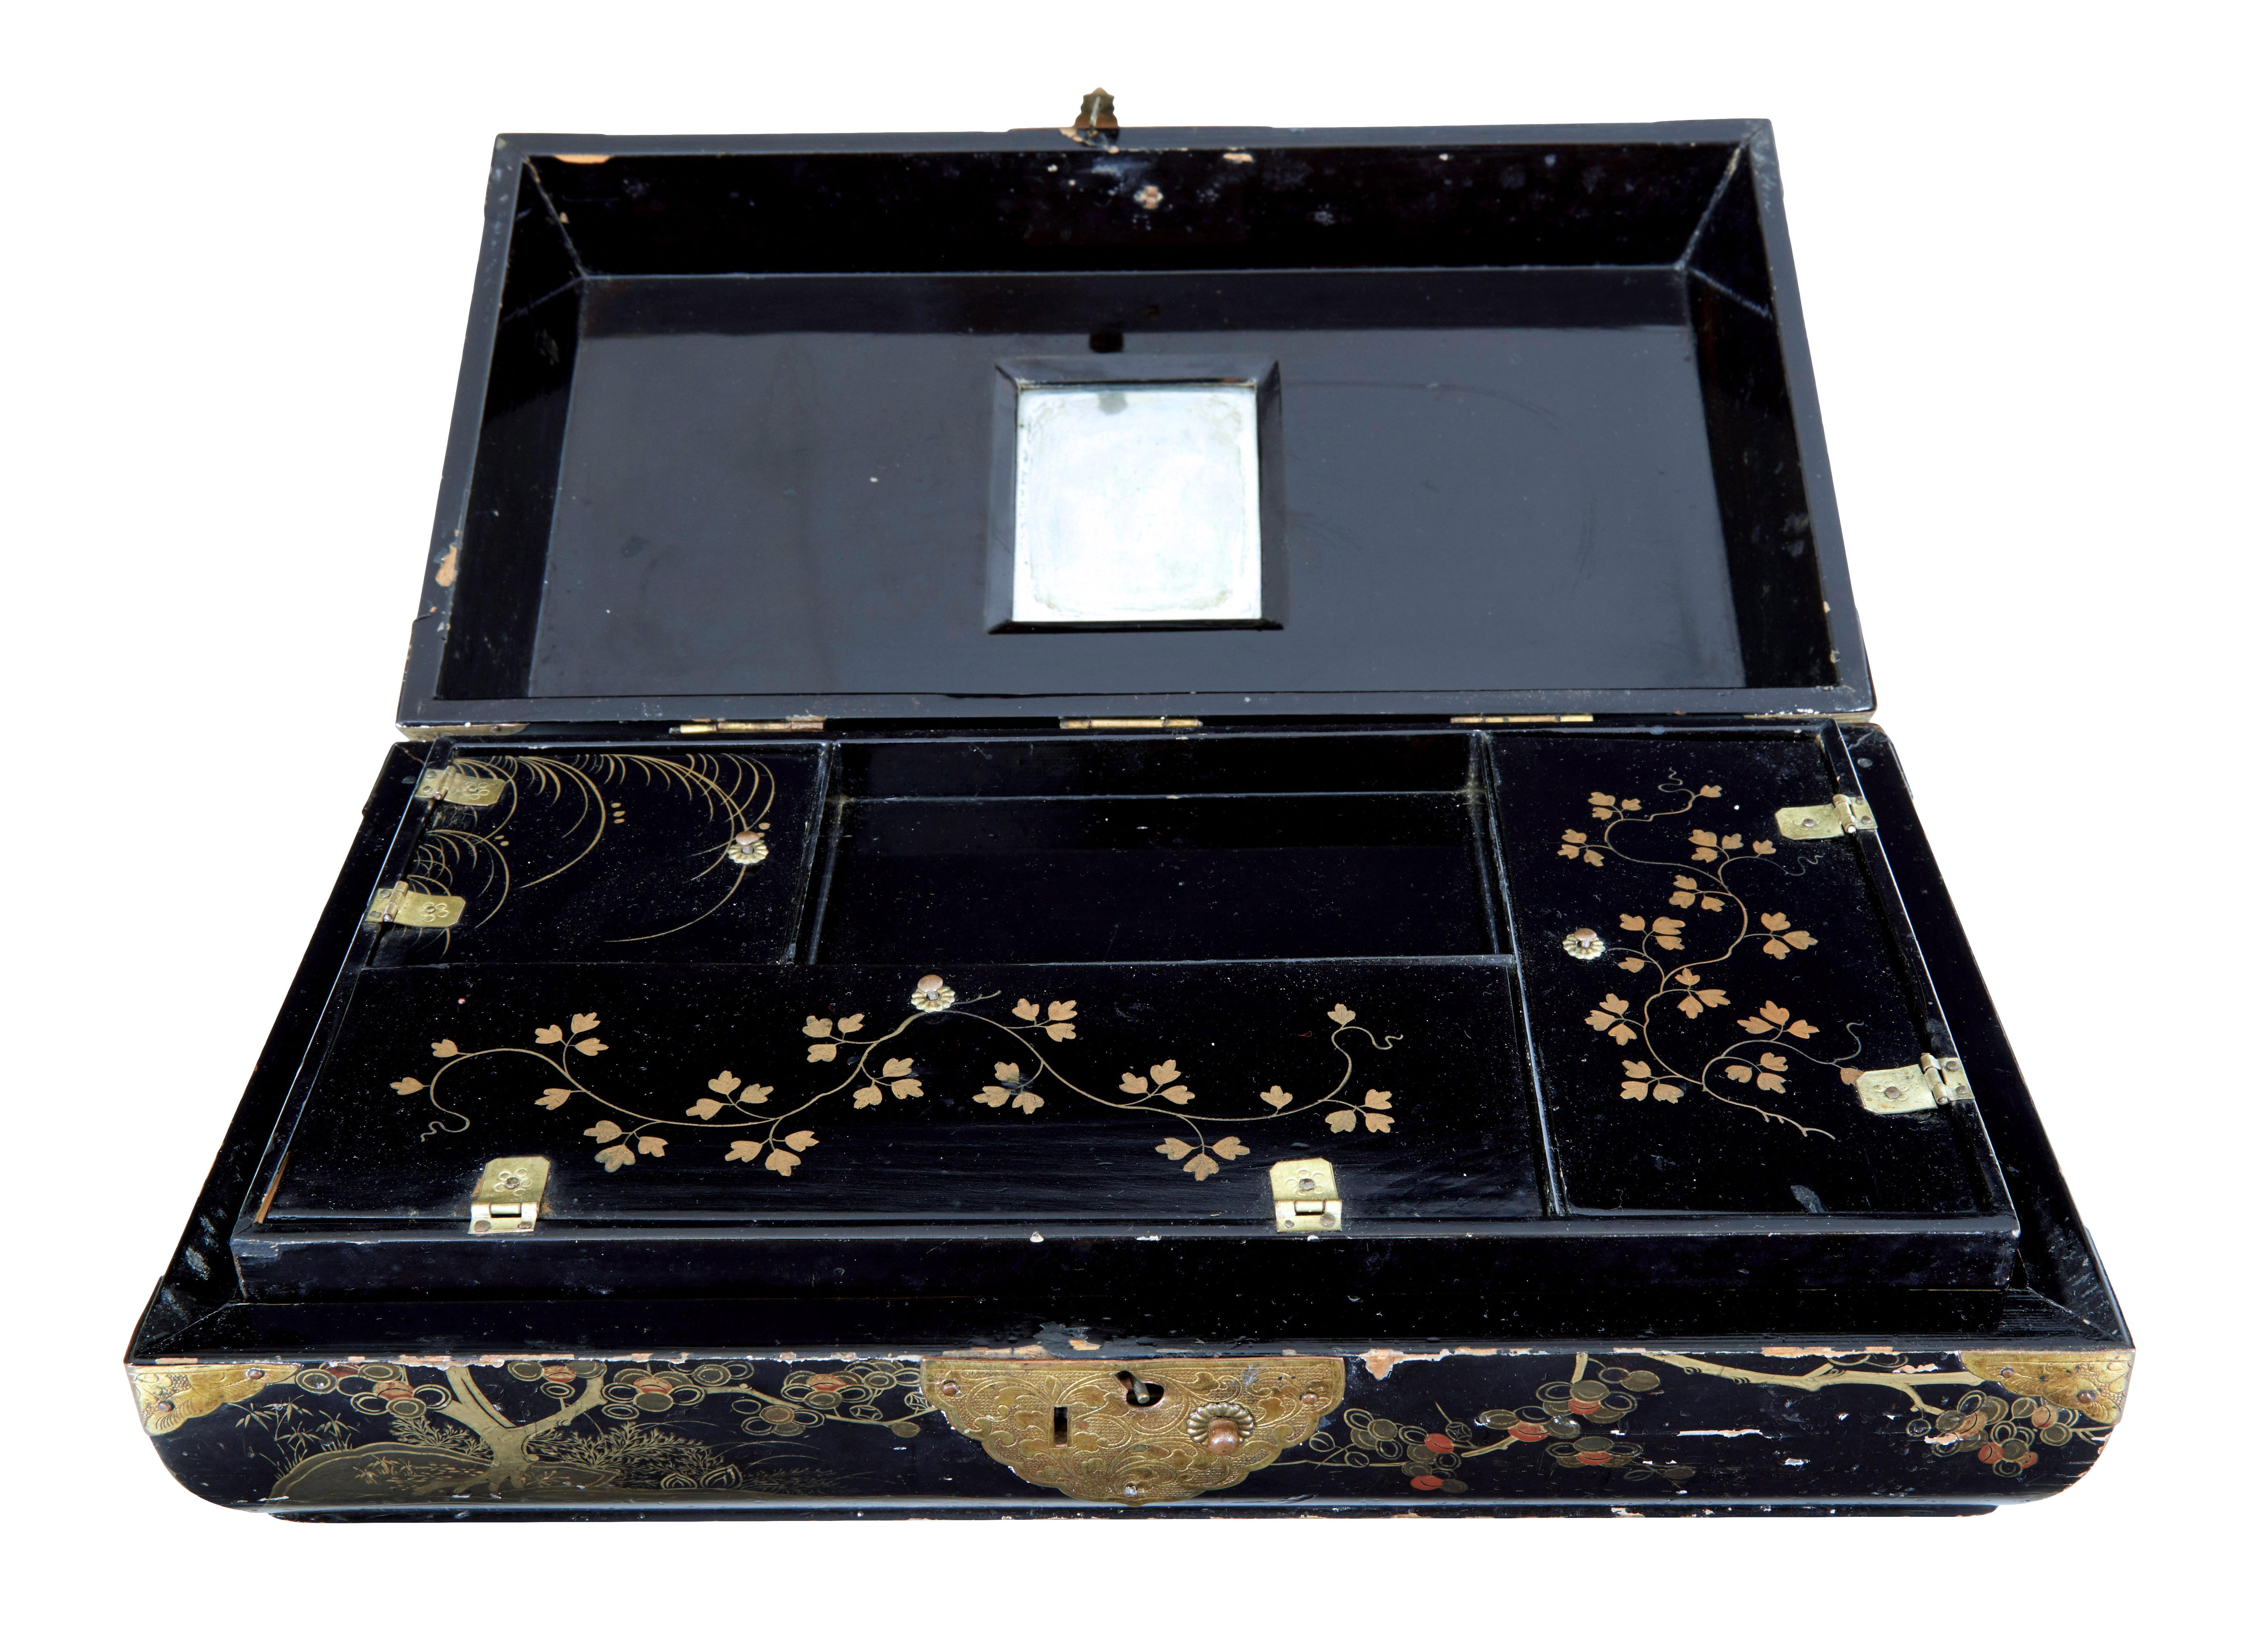 19th century Chinese black lacquered jewellery box, circa 1860.

Good quality shaped Chinese jewellery box with overstuffed top cushion. Hand painted in gold leaf on all surfaces, with the main feature being on the front. Original decorative metal